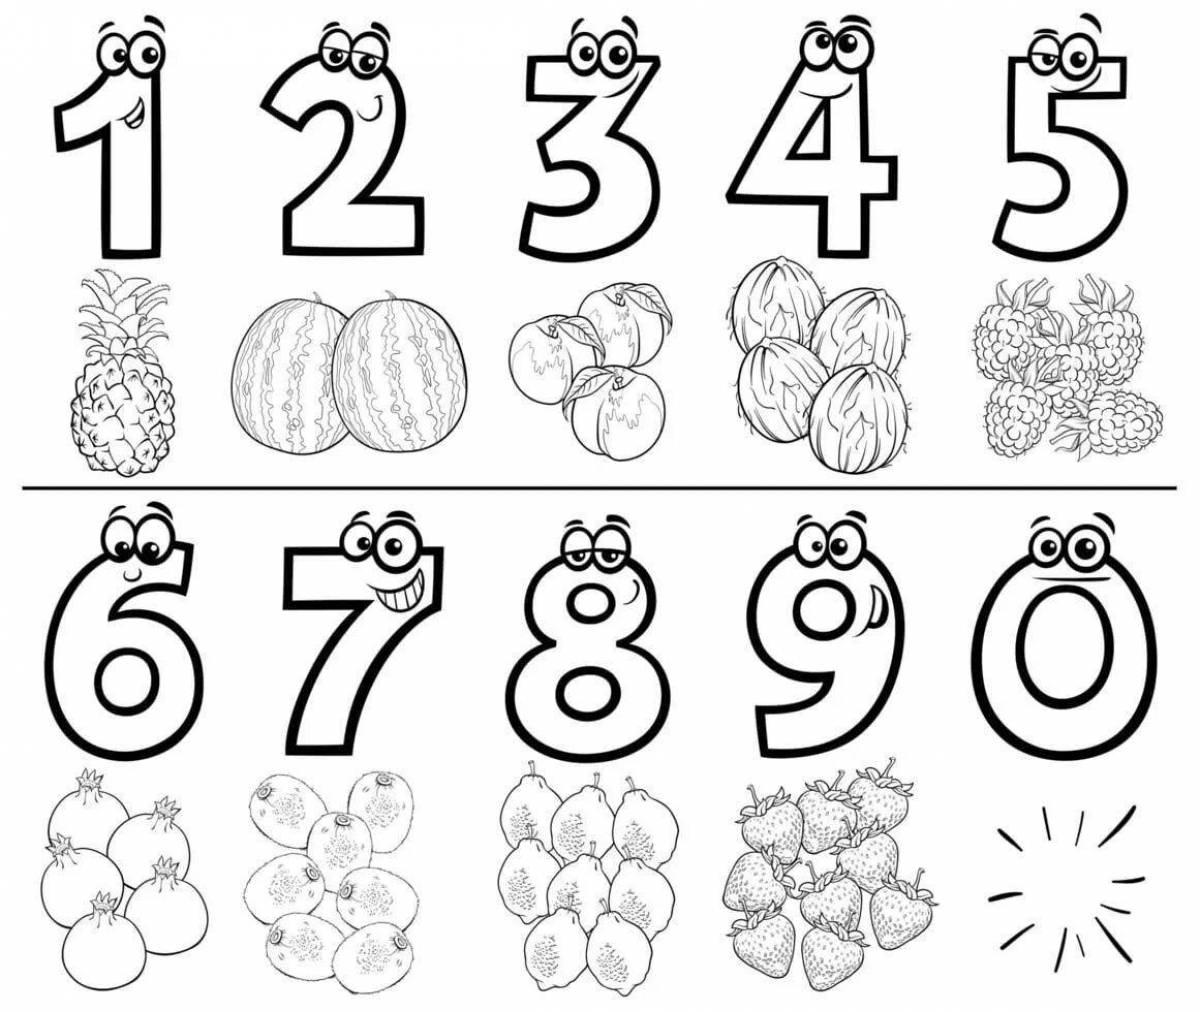 Fun coloring book learning numbers